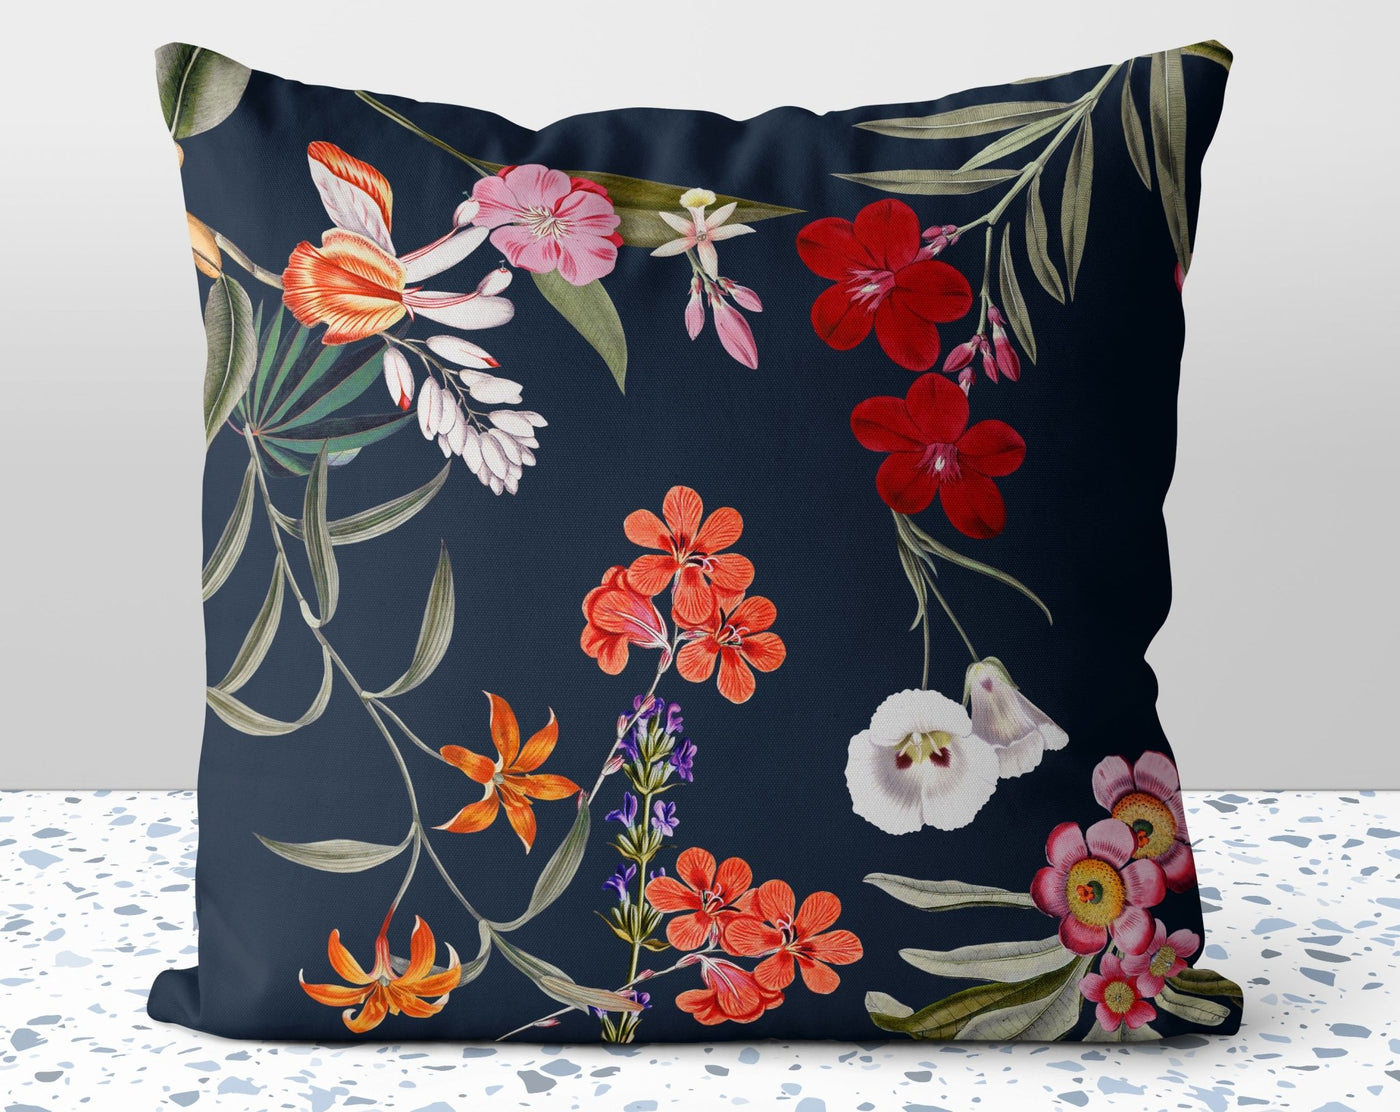 Fresh Floral Flowers on Navy Blue Pillow Throw Cover with Insert - Cush Potato Pillows